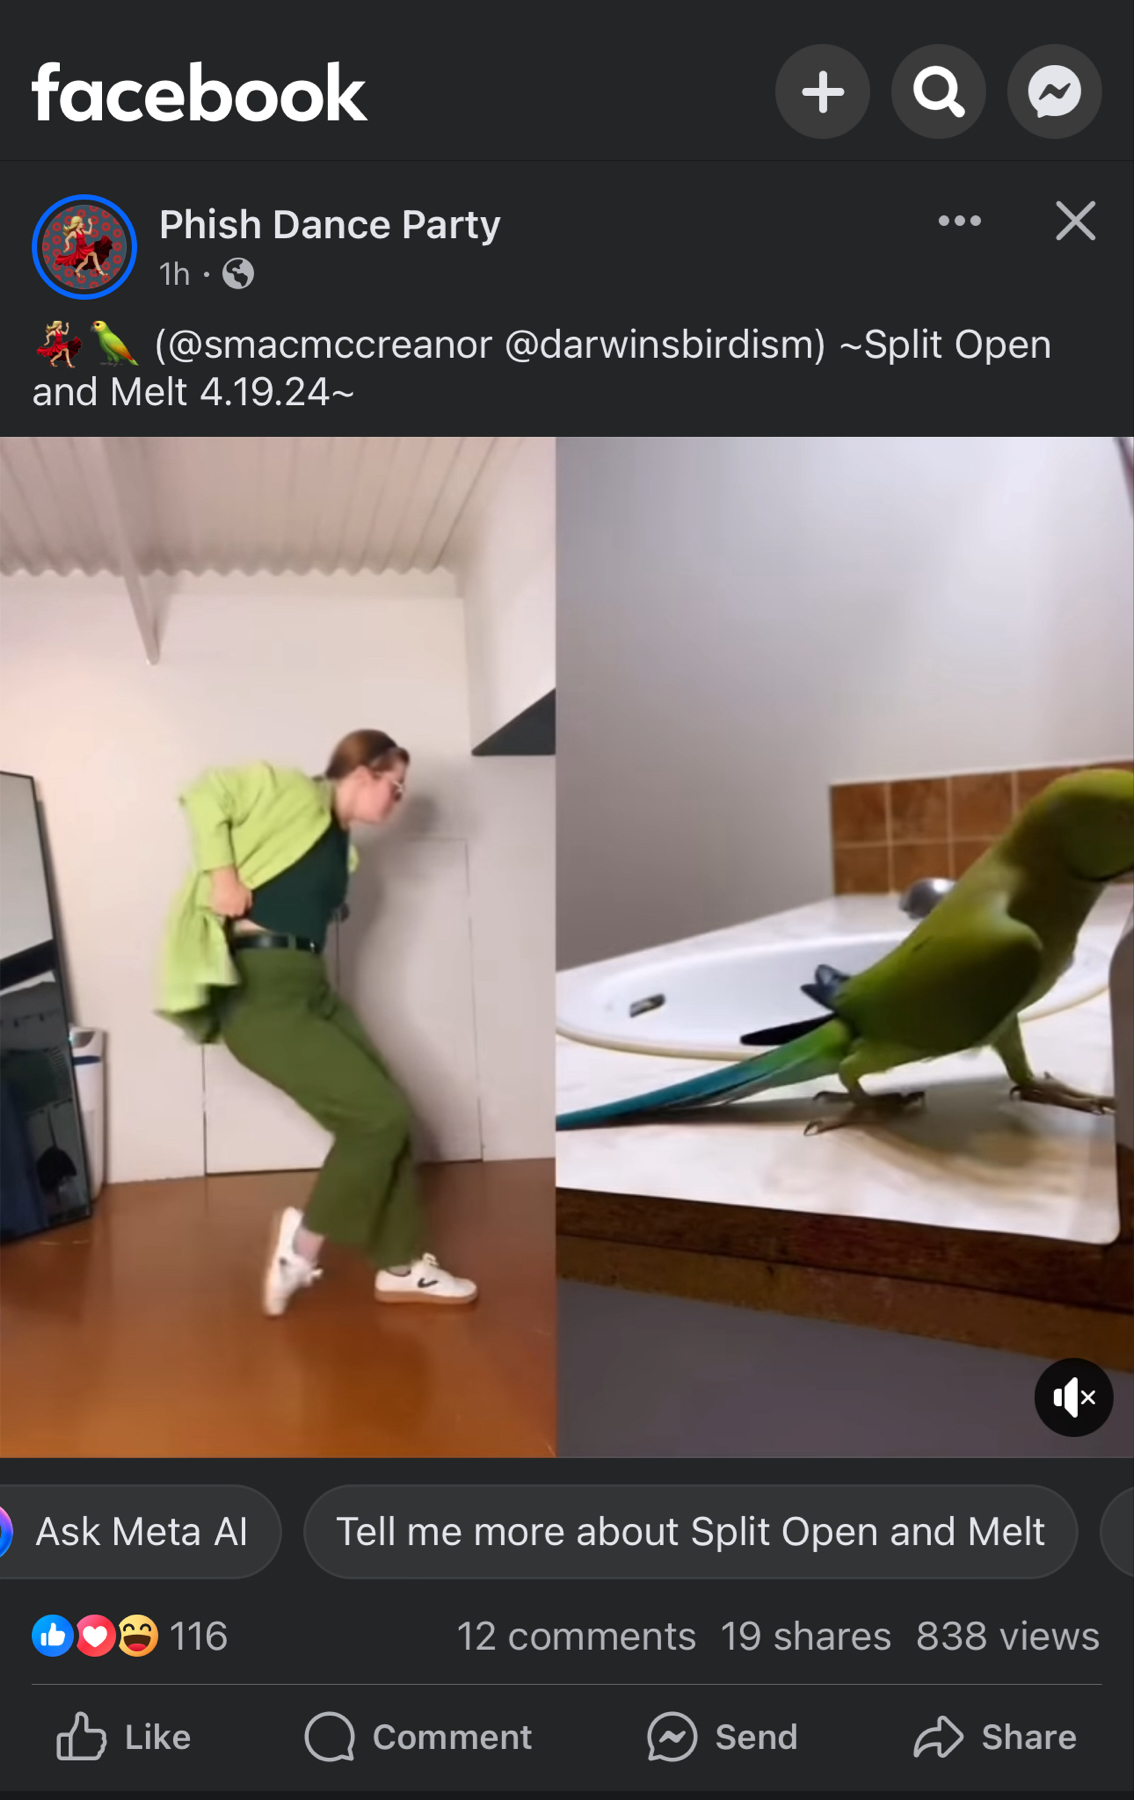 A split-screen image showing on the left a person in a green outfit dancing with their face leaning against a wall, and on the right, a green parakeet perched on a broom handle imitating the person’s head-tilted pose